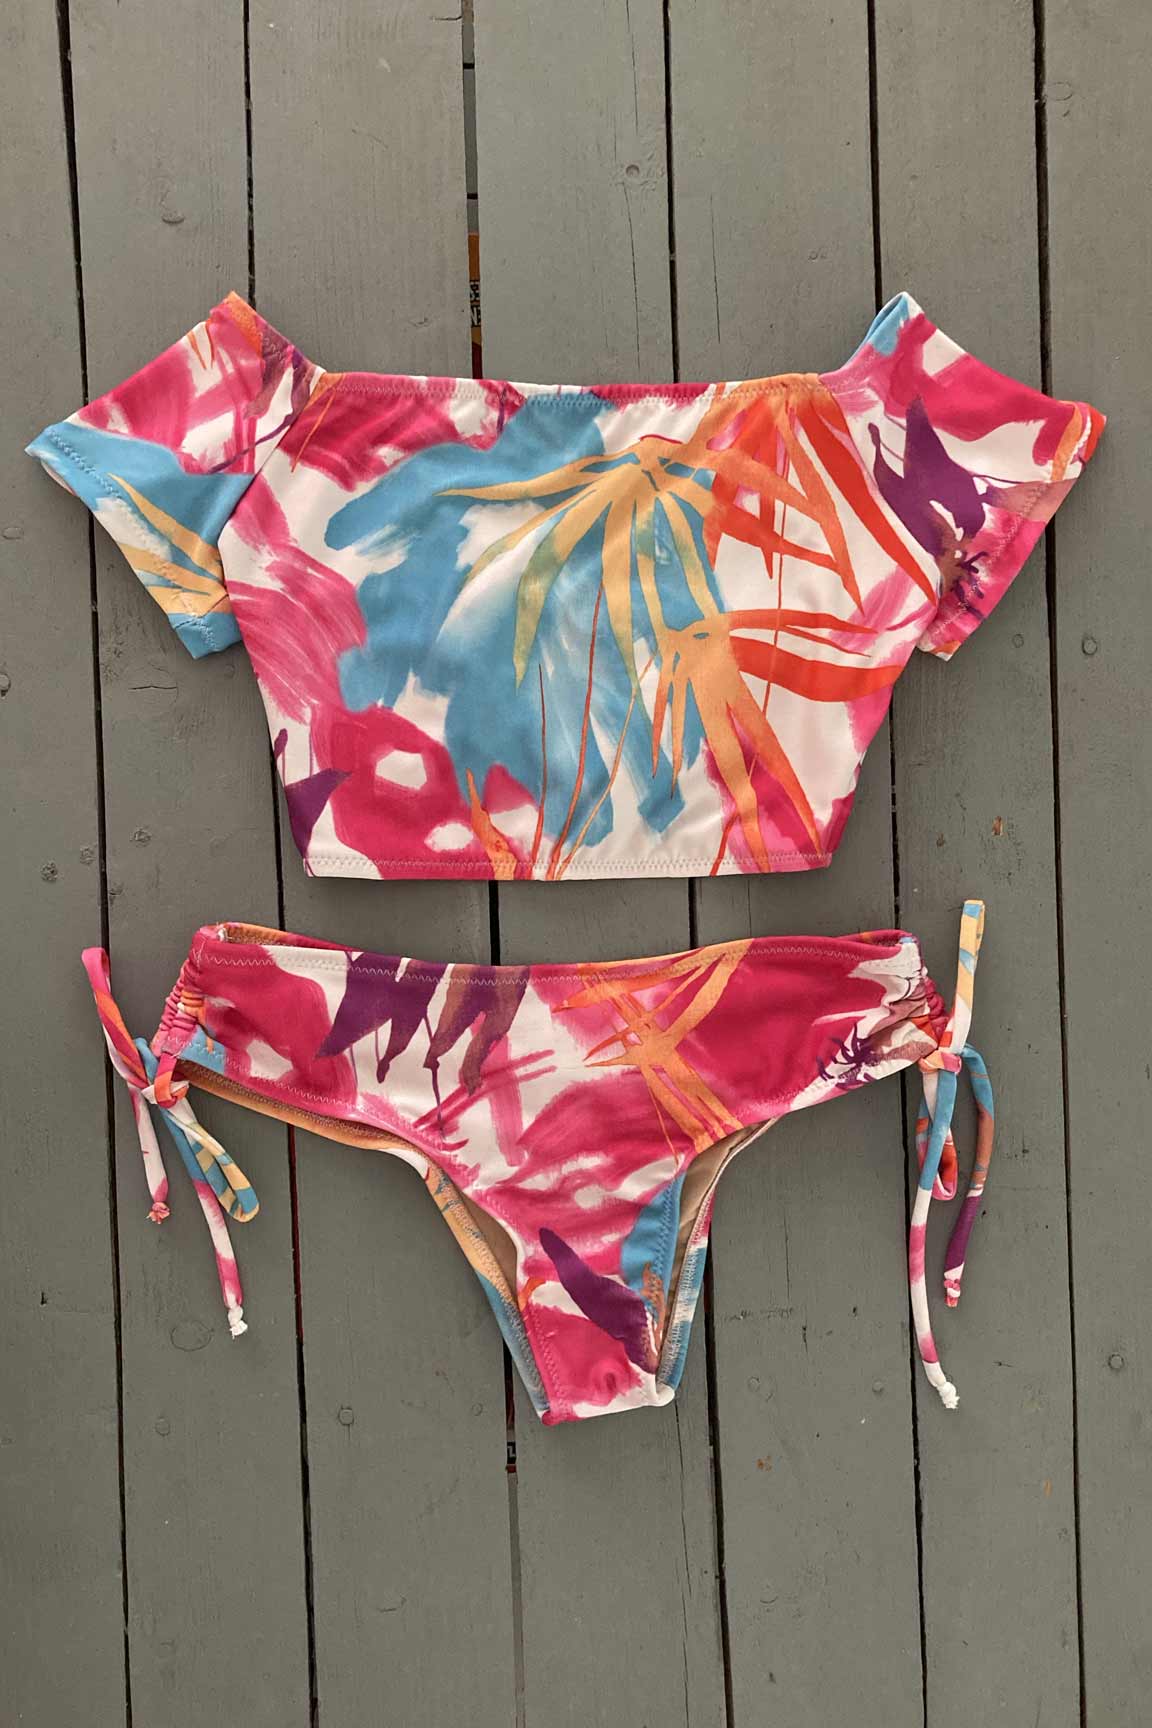 These wide cinched tie bottoms have more coverage, yet, are still sexy with a light scrunch. Very soft Lycra. Compliment your look by matching with the short sleeve bikini crop tops. Order yours today. @jillesbikinis